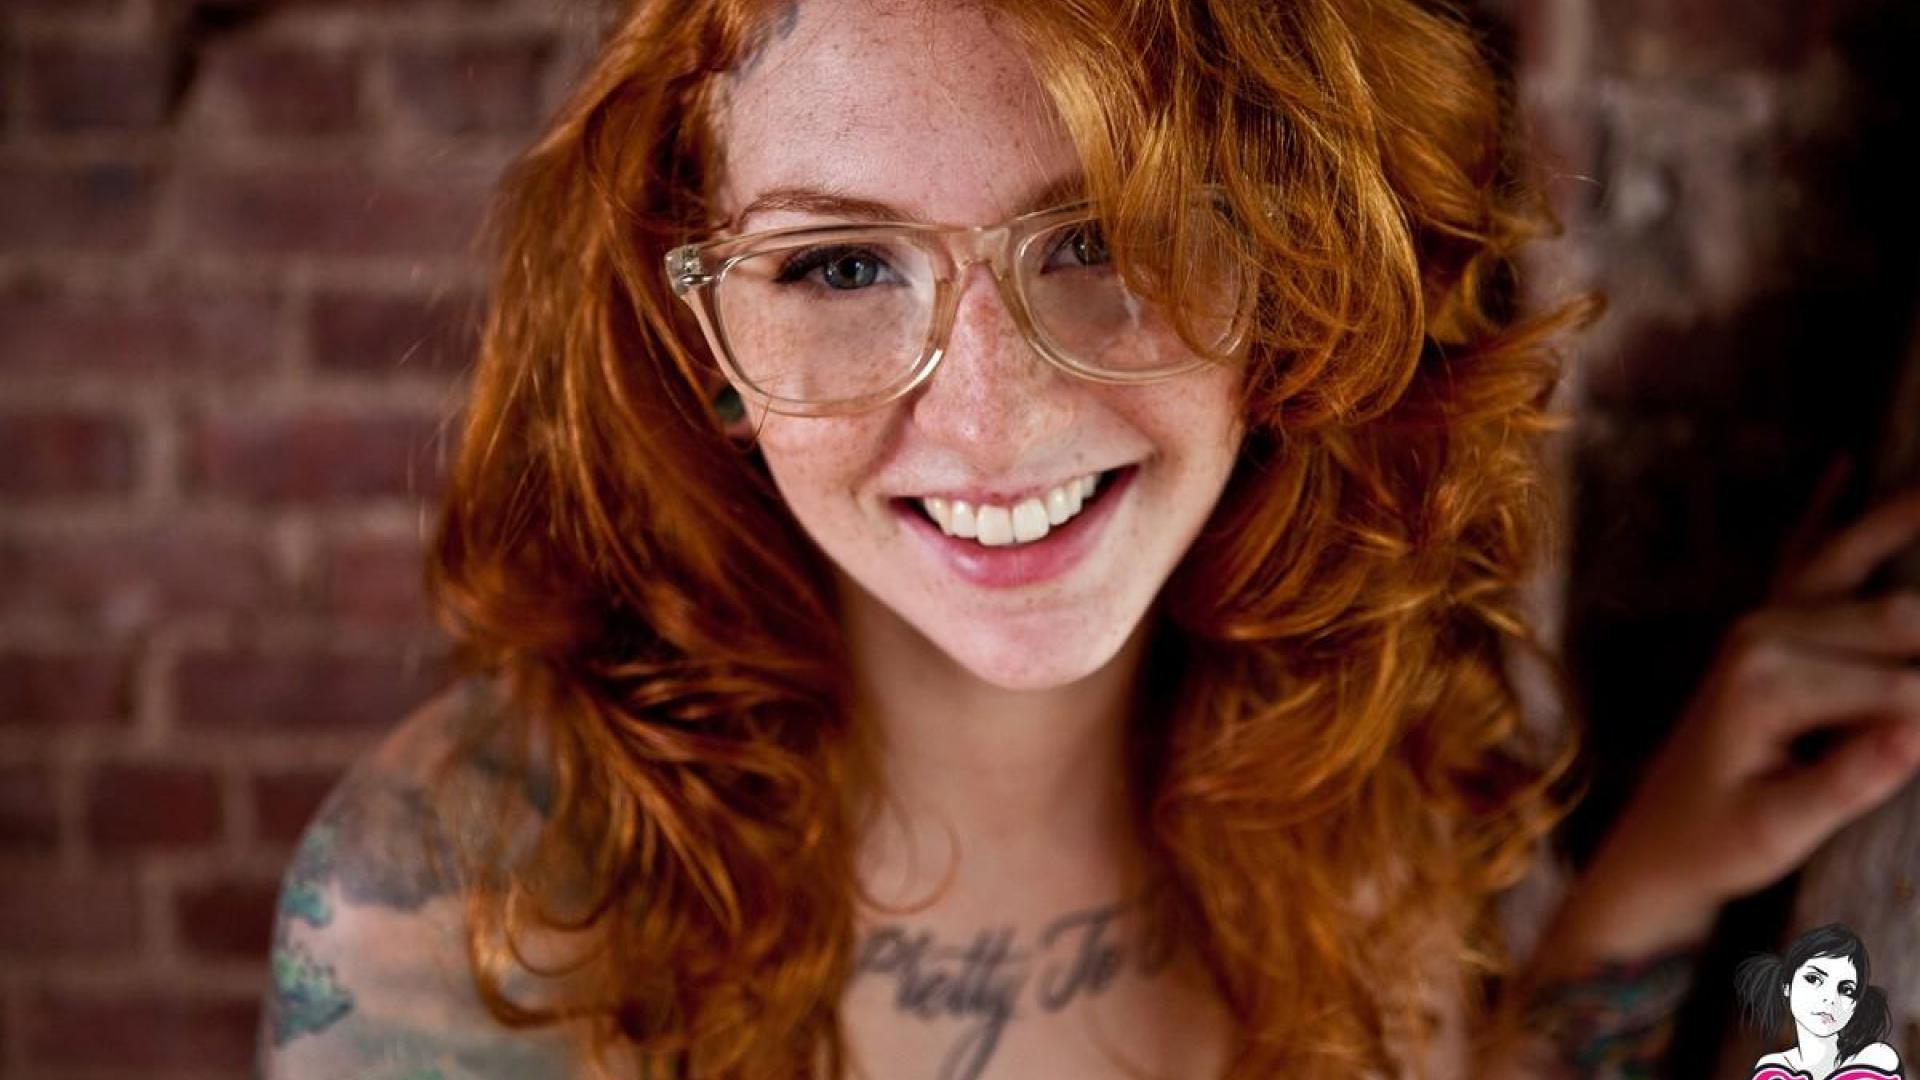 Glasses Face Tattoo Suicide girls Women Freckles Redhead Smiling ...